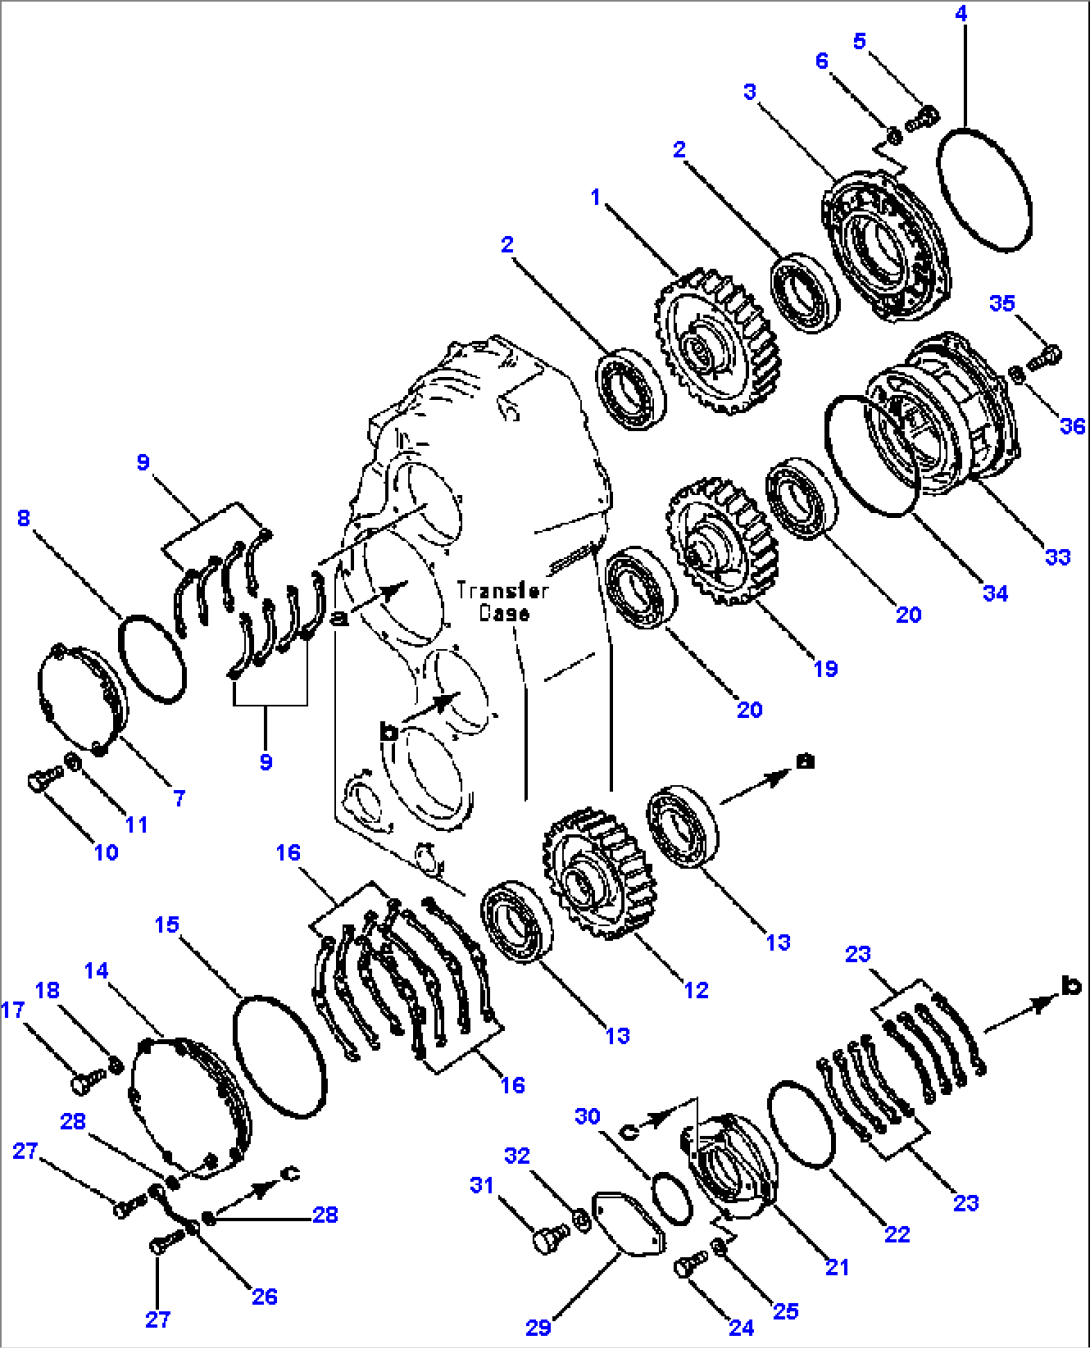 TRANSMISSION TRANSFER OUTPUT GEARS